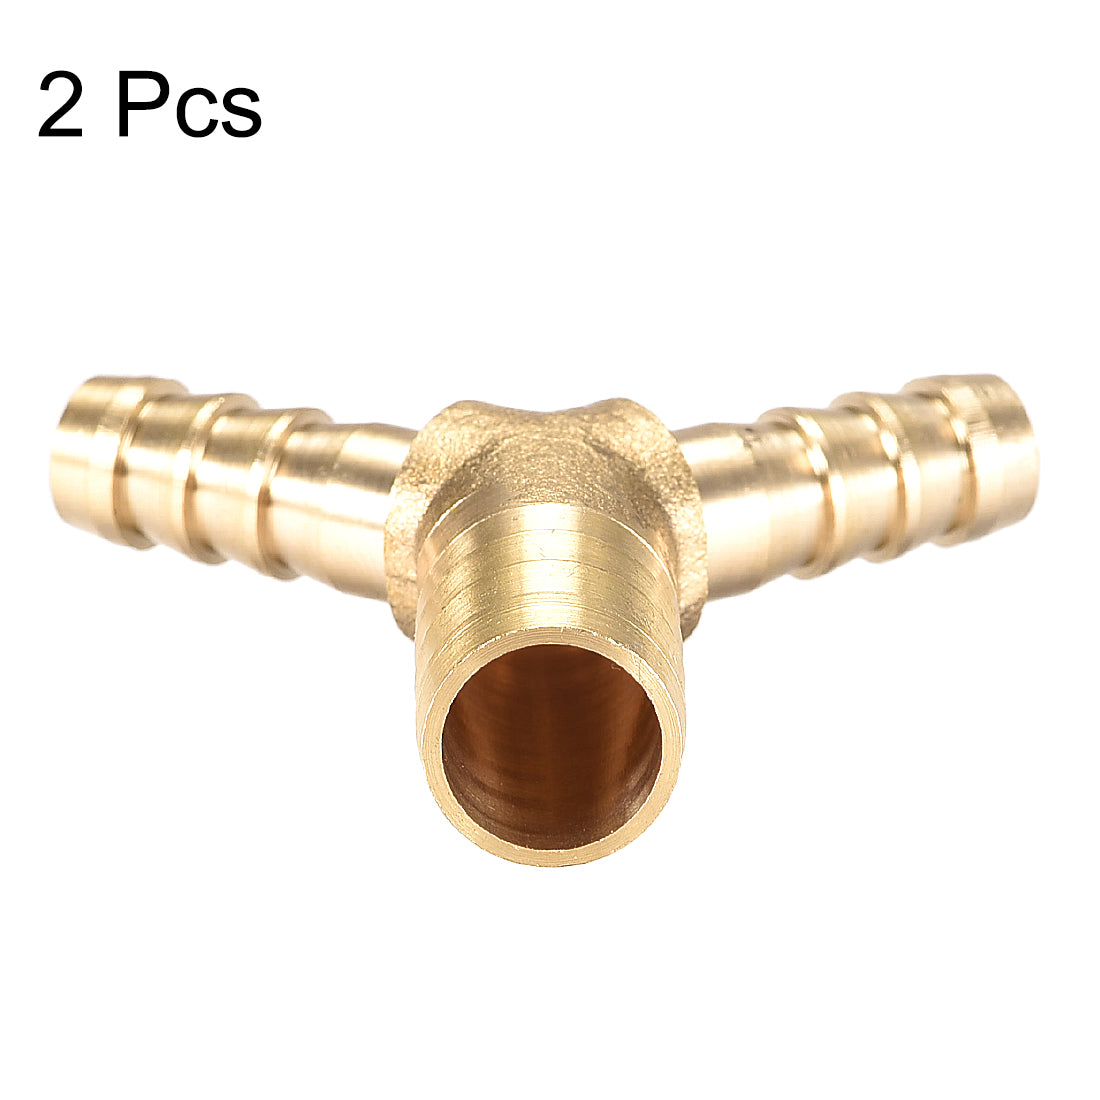 Uxcell Uxcell Tee Brass Barb Fitting Reducer Y Shape 3 Way Fit Hose ID 14mm x 10mm x 10mm 2pcs